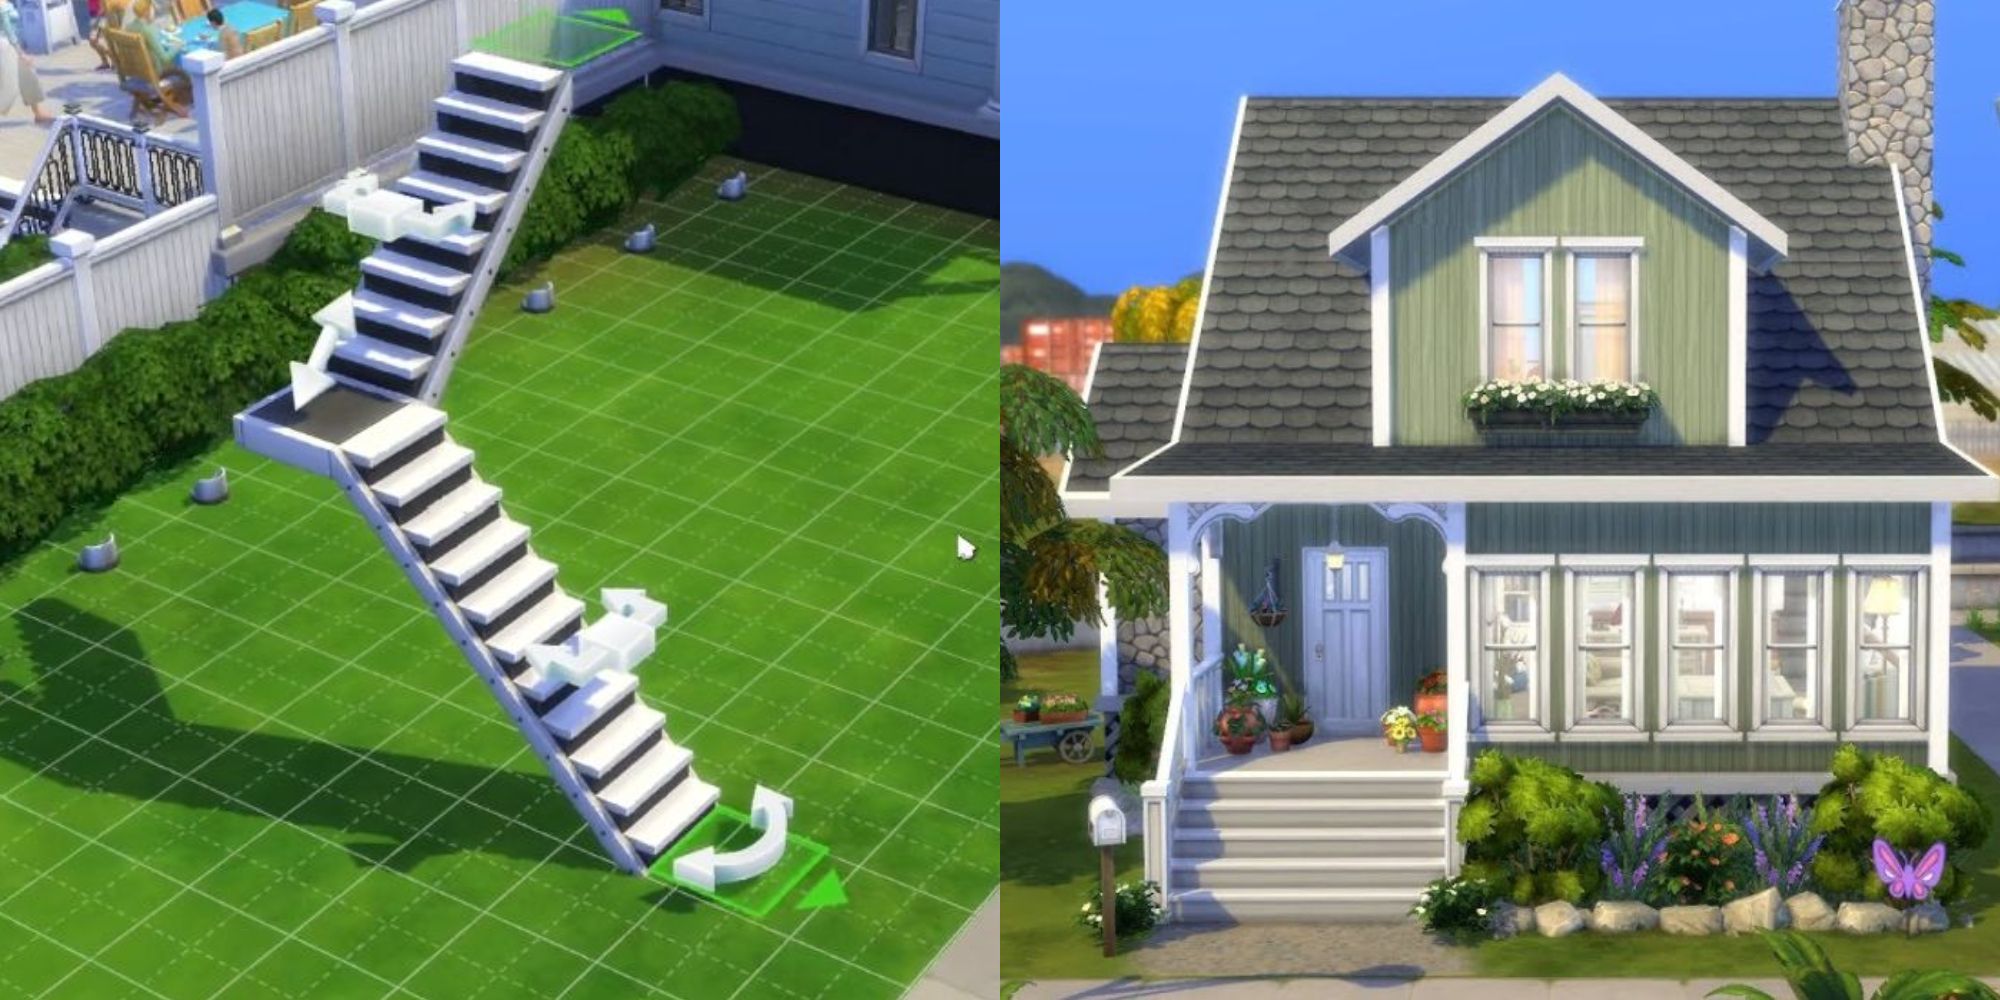 Split image of configurable stairs and a pretty house in The Sims 4